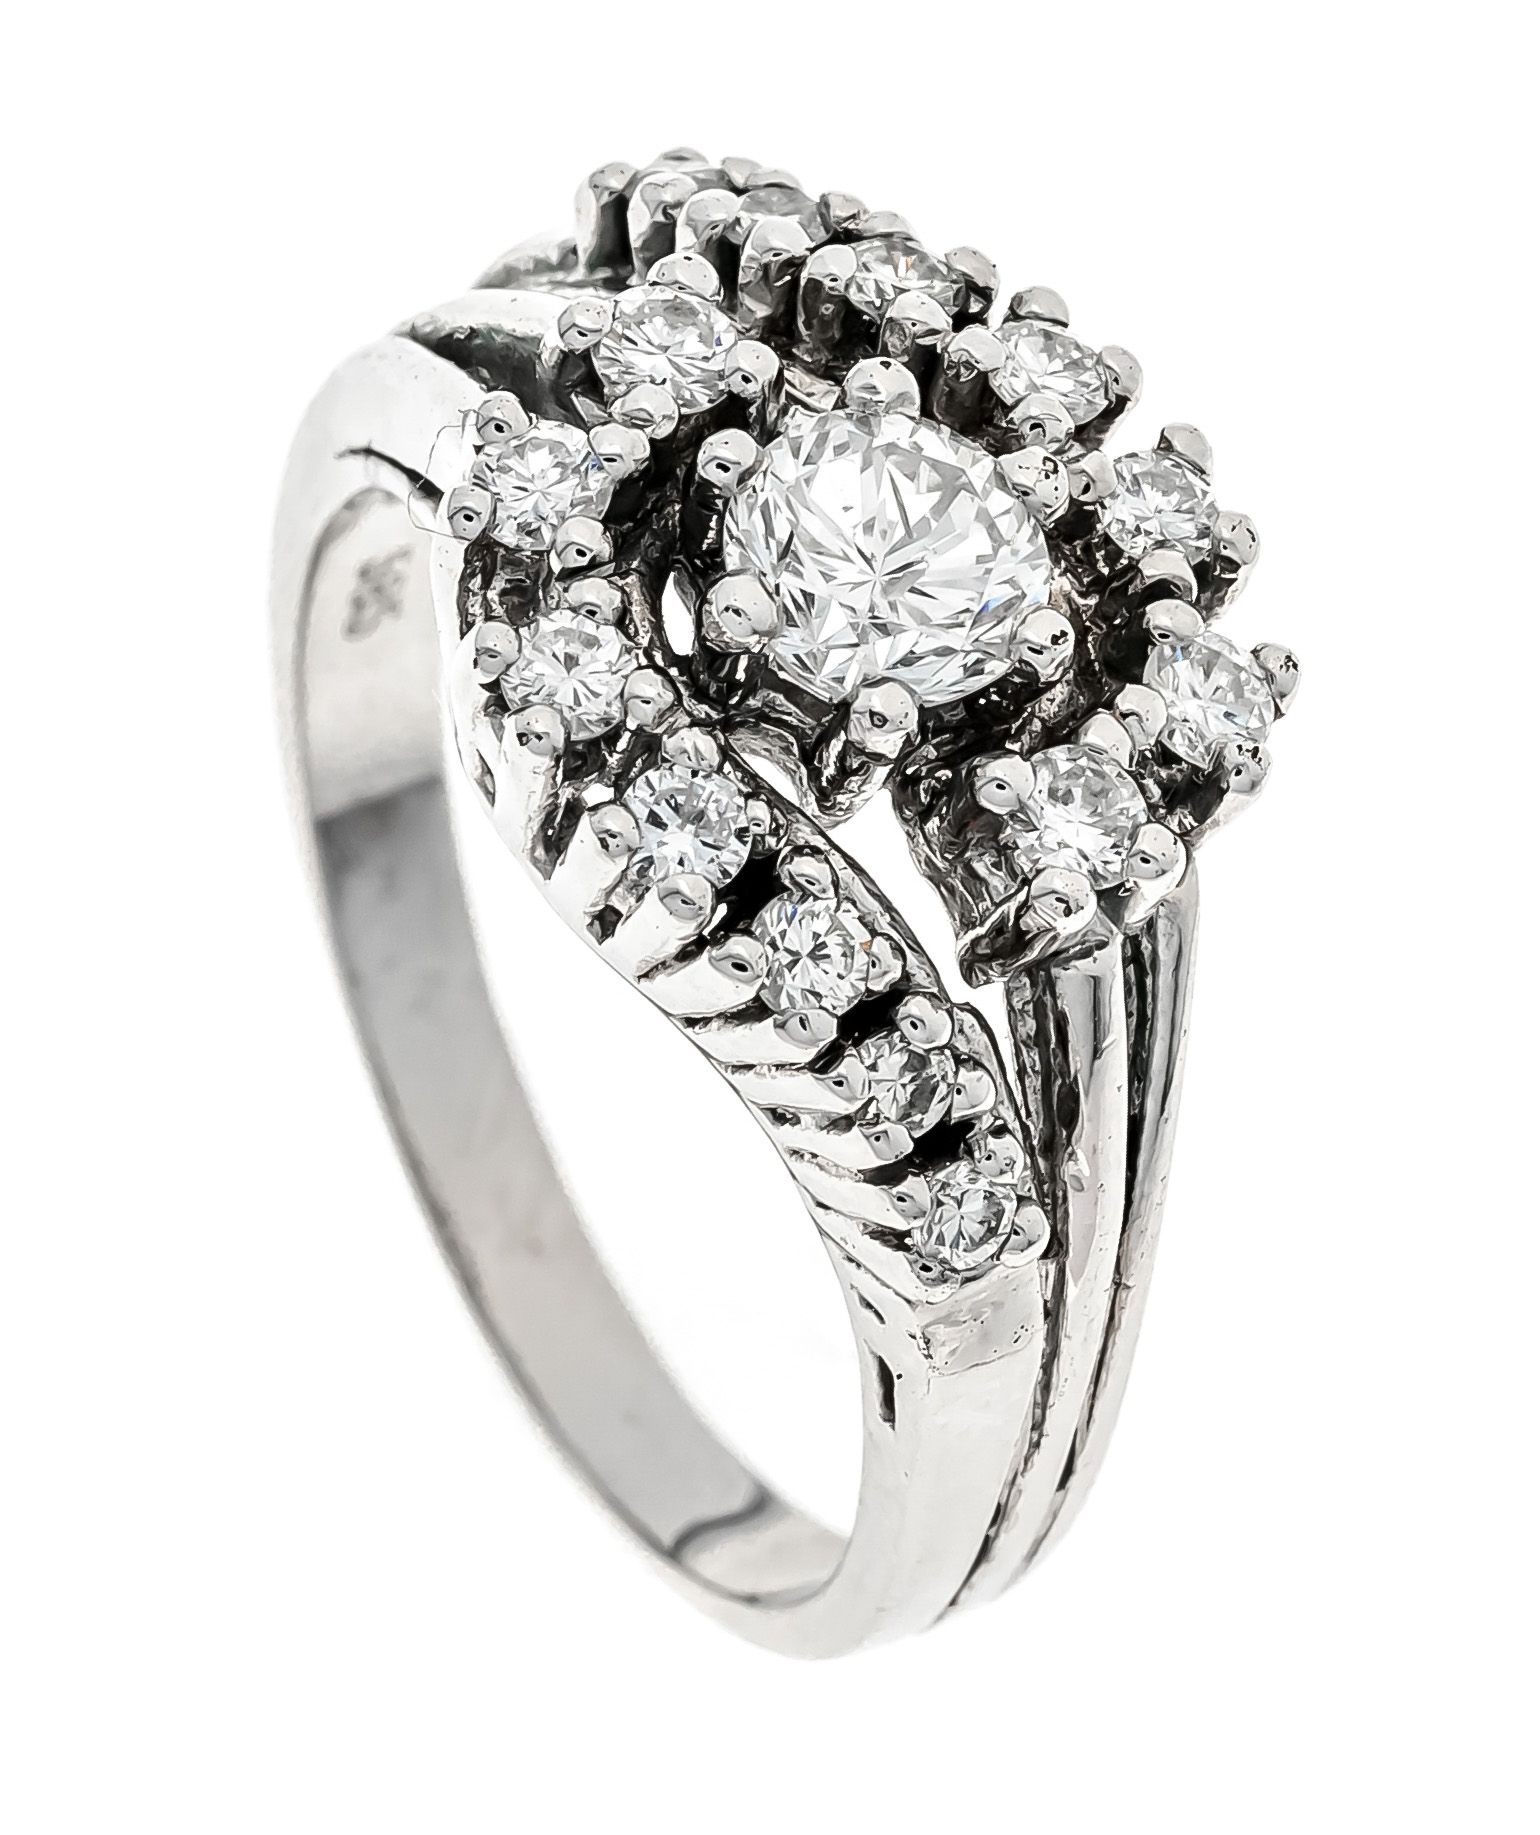 Null Brilliant ring WG 585/000 with 15 diamonds add. 0,90 ct W/SI, RG 56, 6,4 g